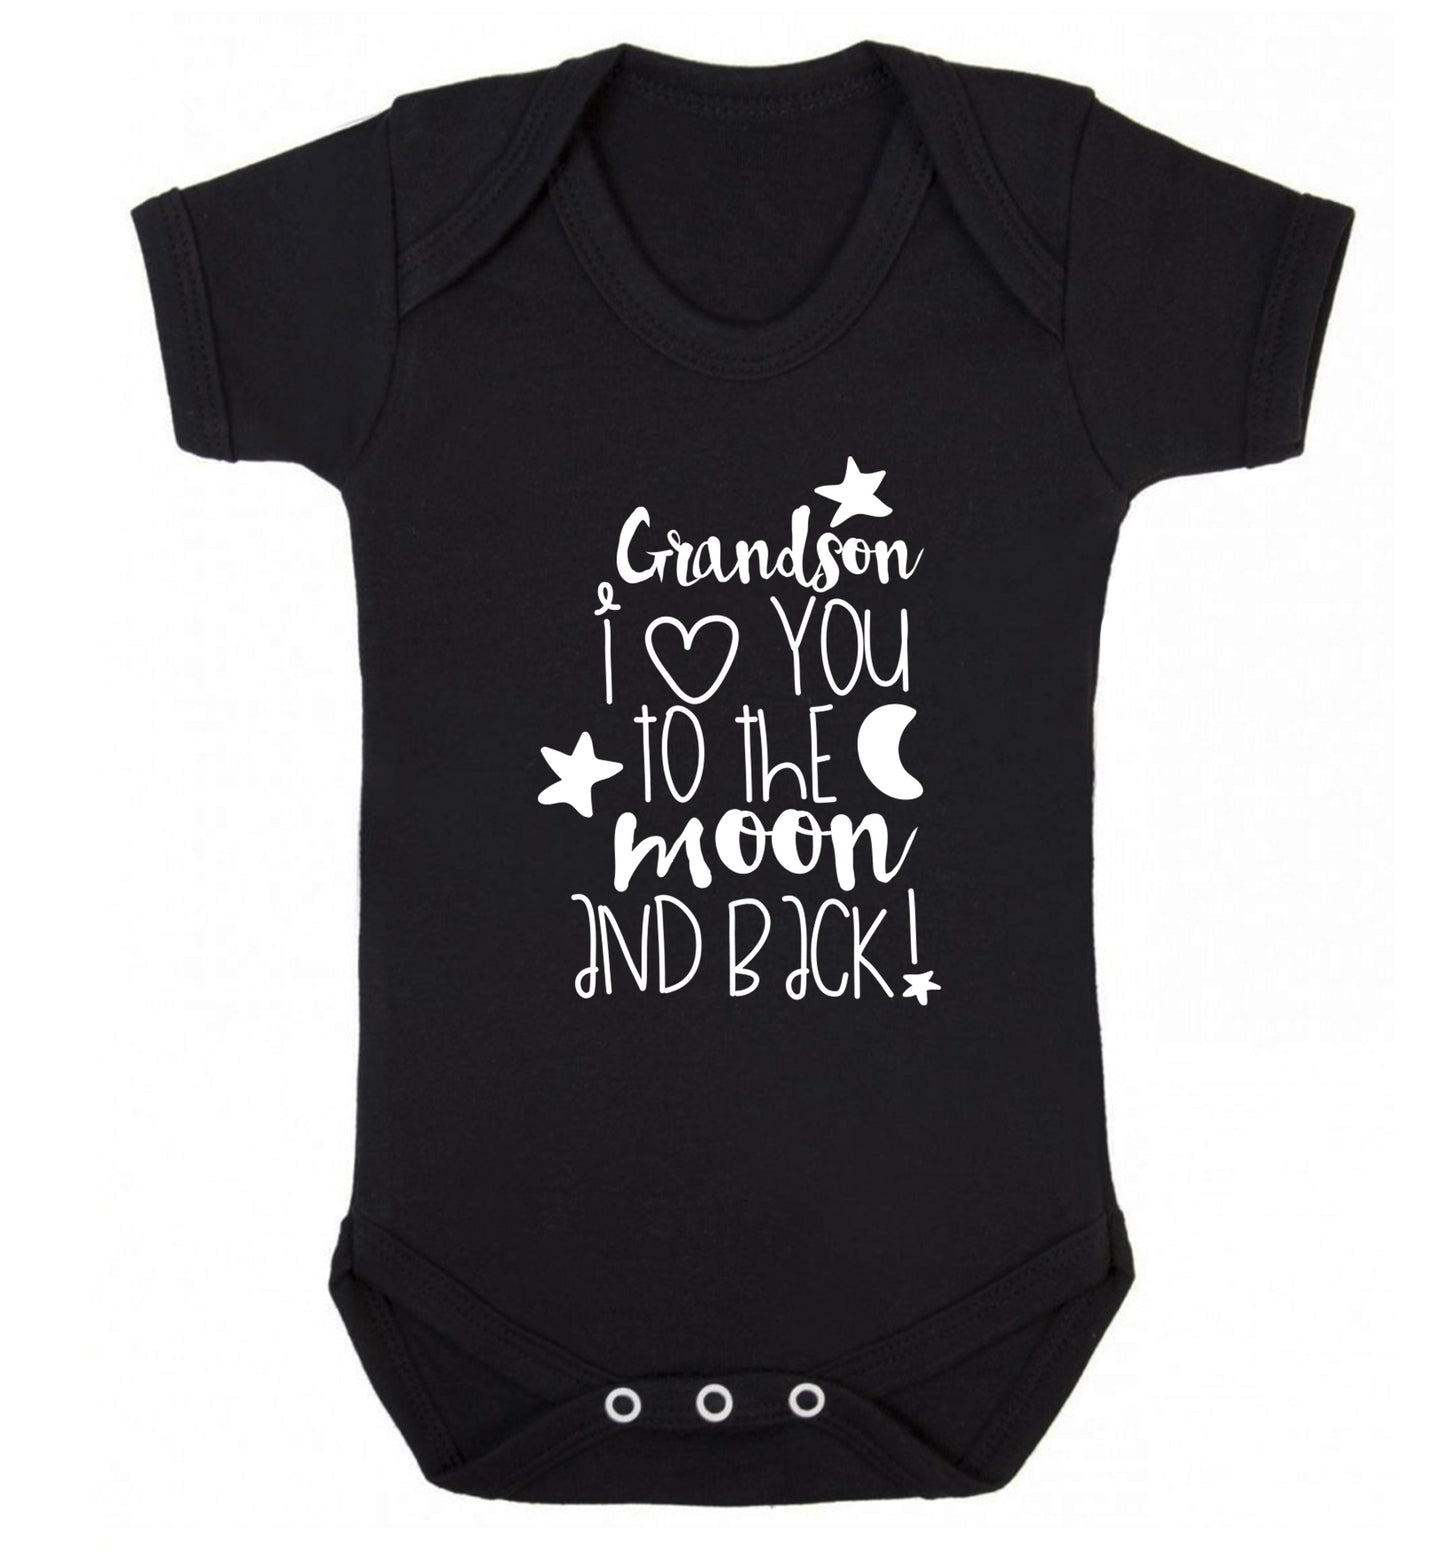 Grandson I love you to the moon and back Baby Vest black 18-24 months